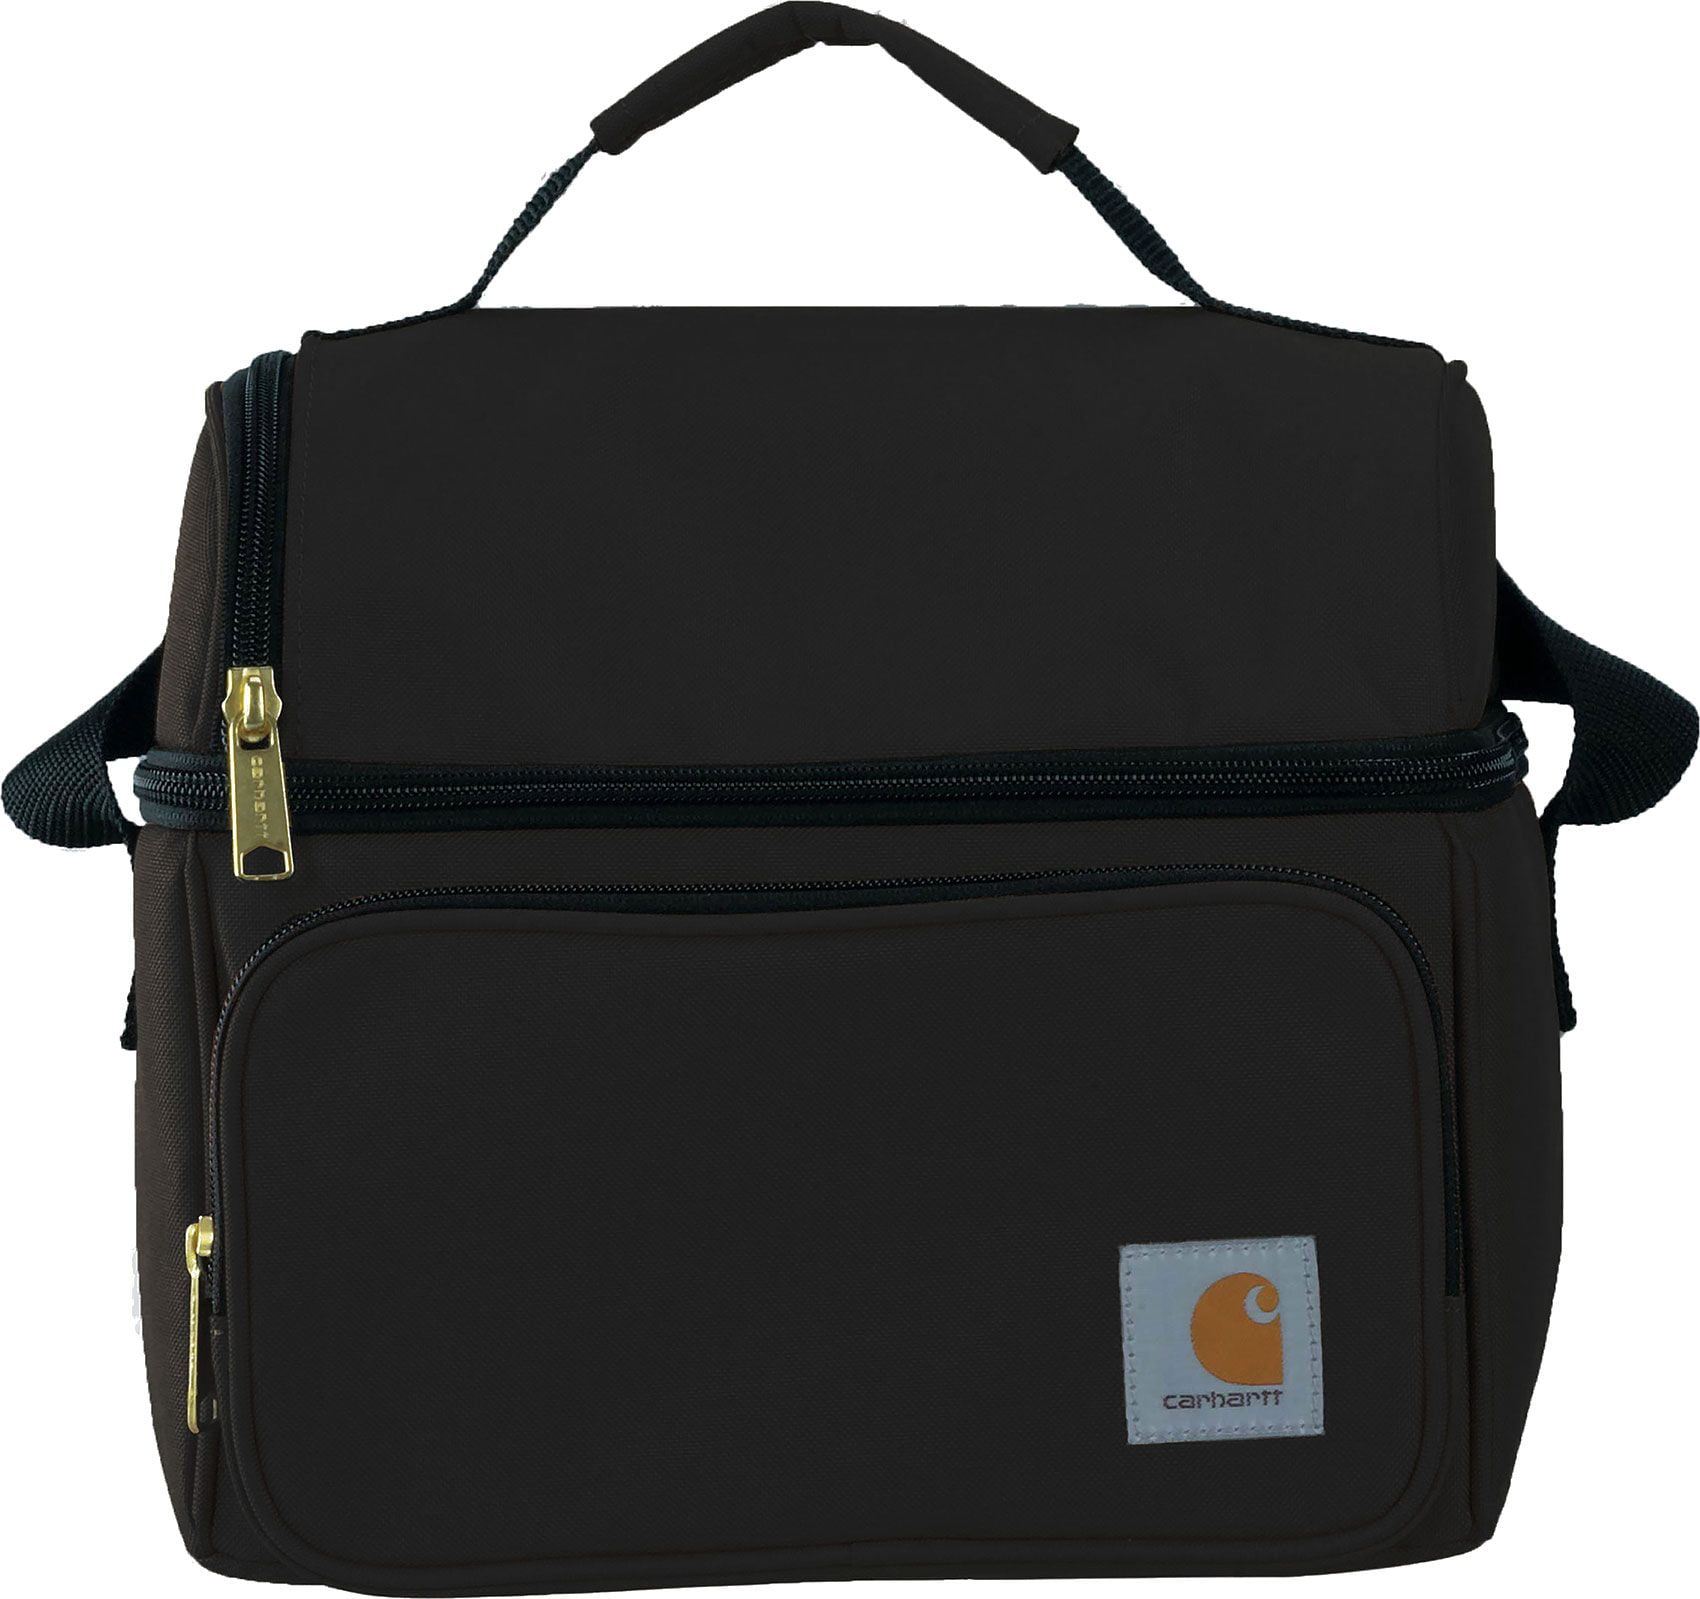 Carhartt 35810002 Deluxe Dual Compartment Insulated Lunch Cooler Bag 2day Ship for sale online 